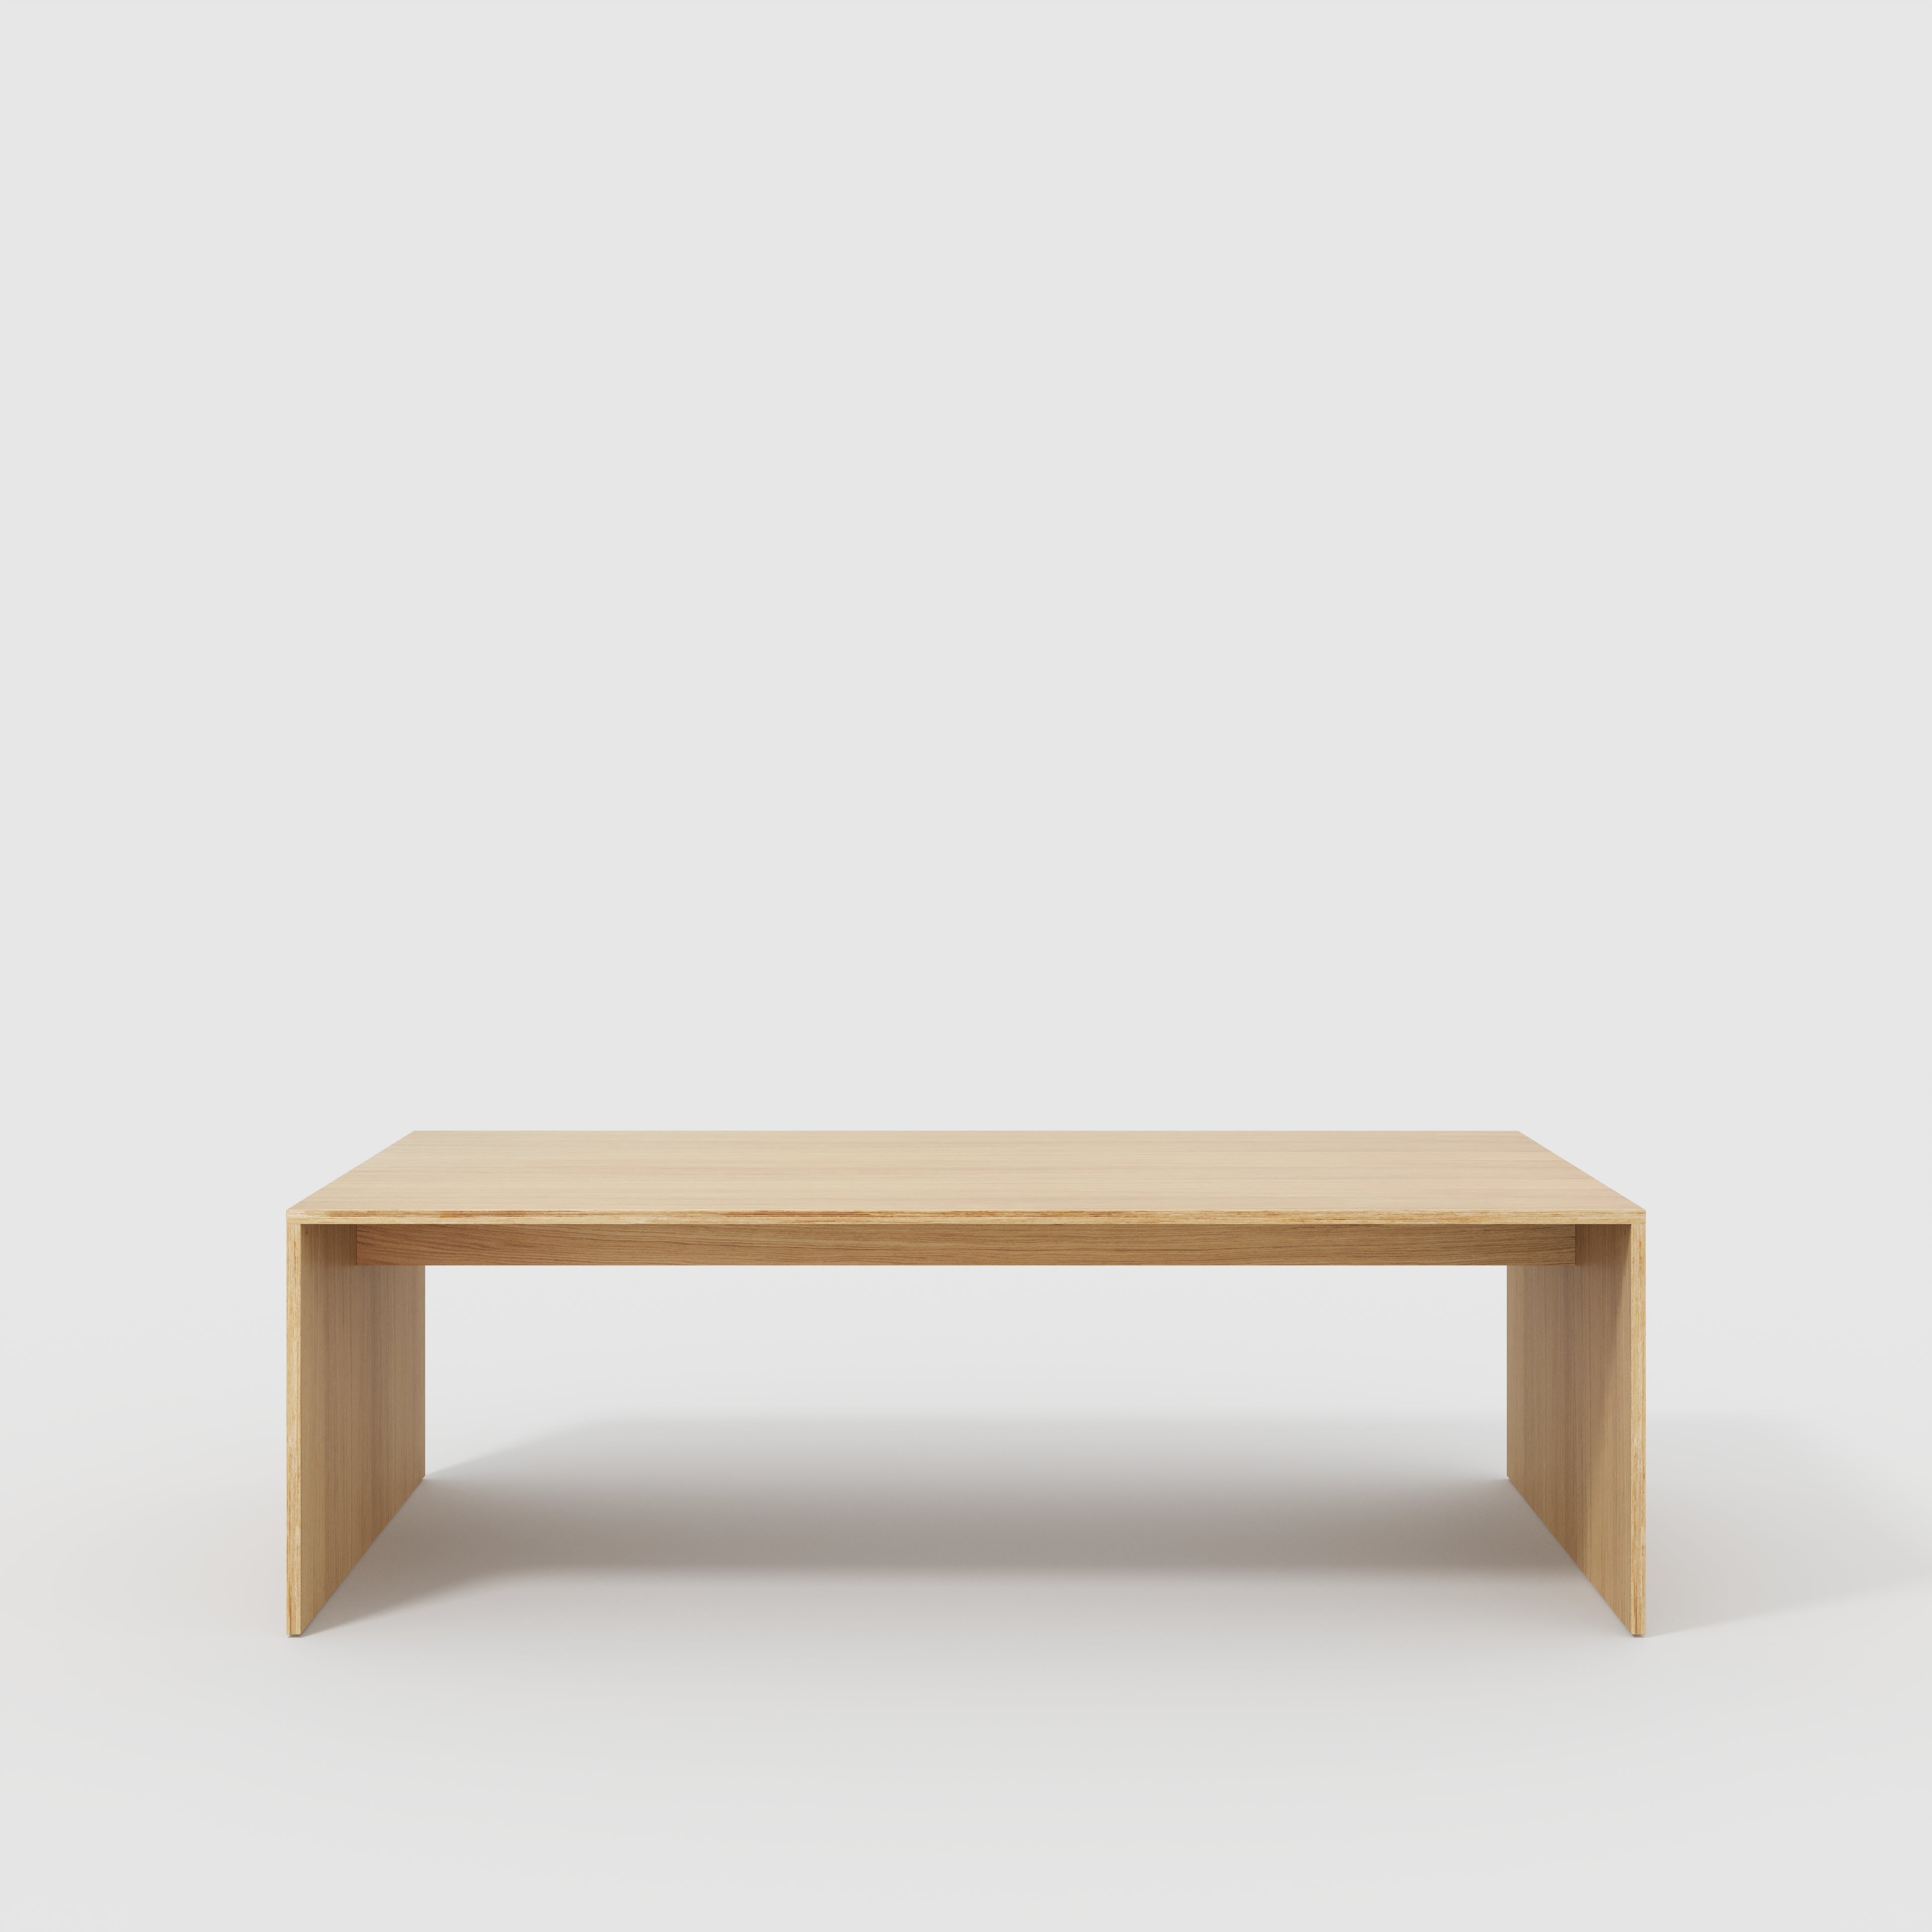 Table with Solid Sides - Plywood Oak - 2400(w) x 1200(d) x 750(h)